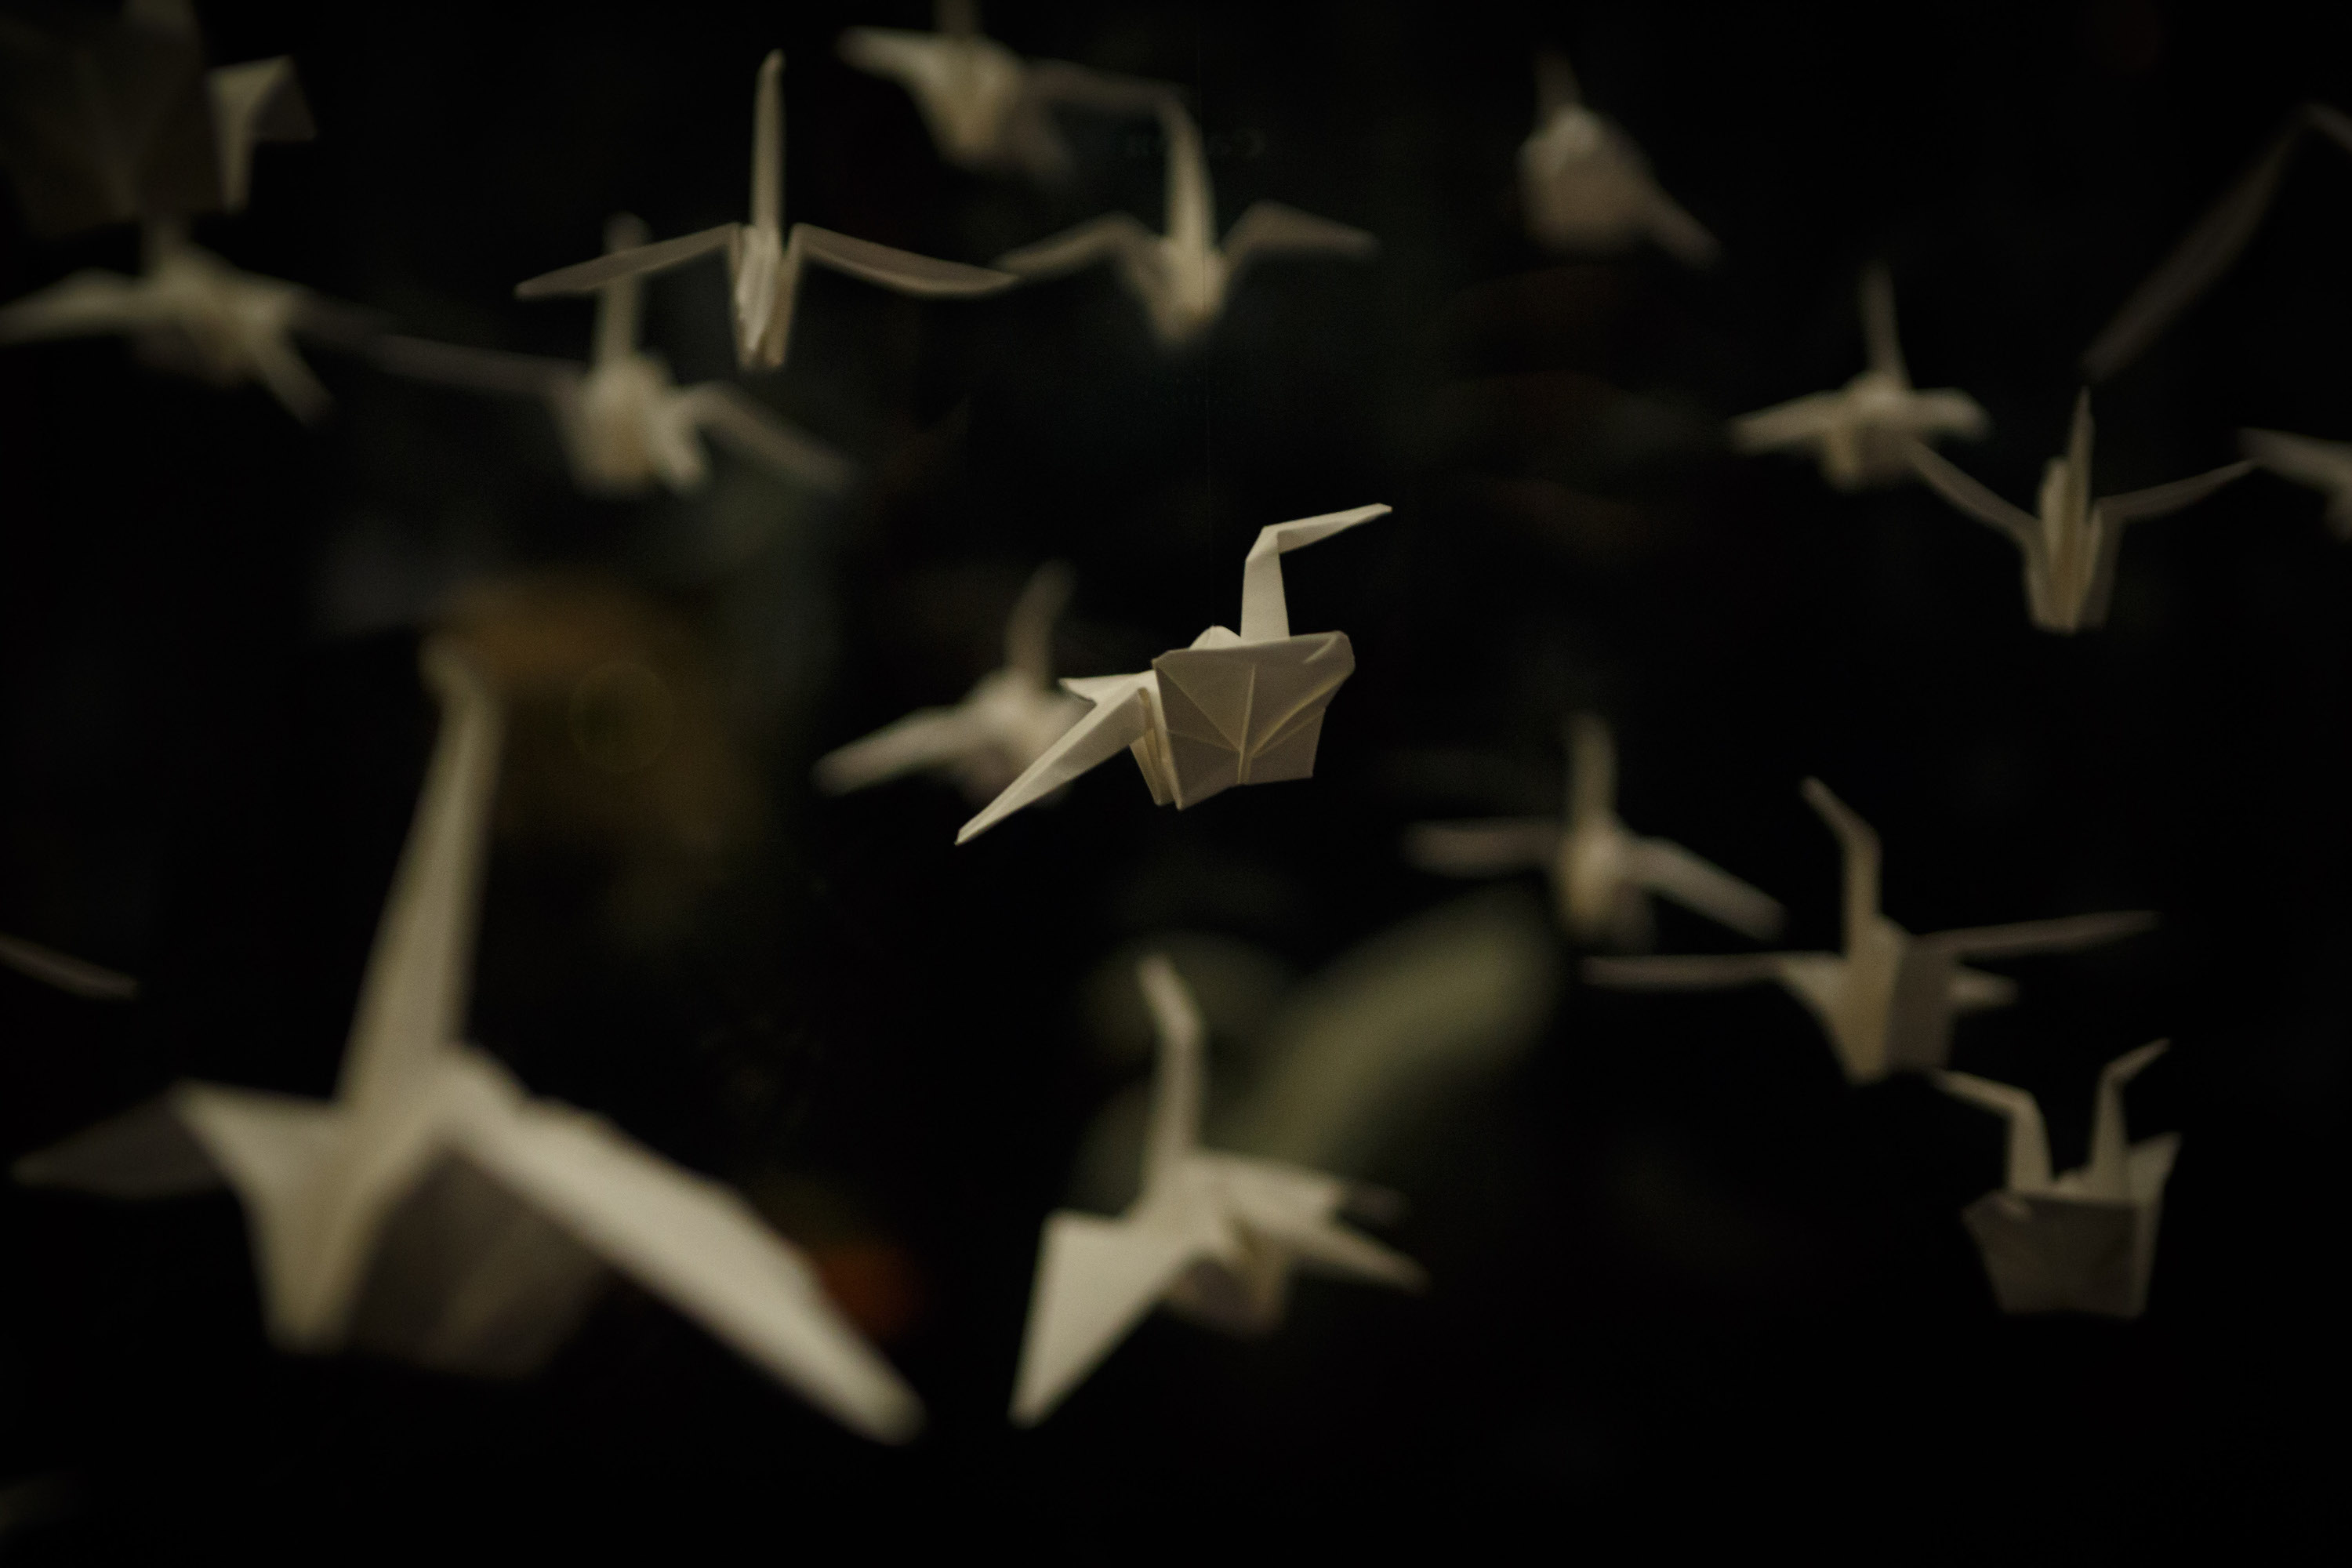 An image showing white Origami Birds suspended against a dark background